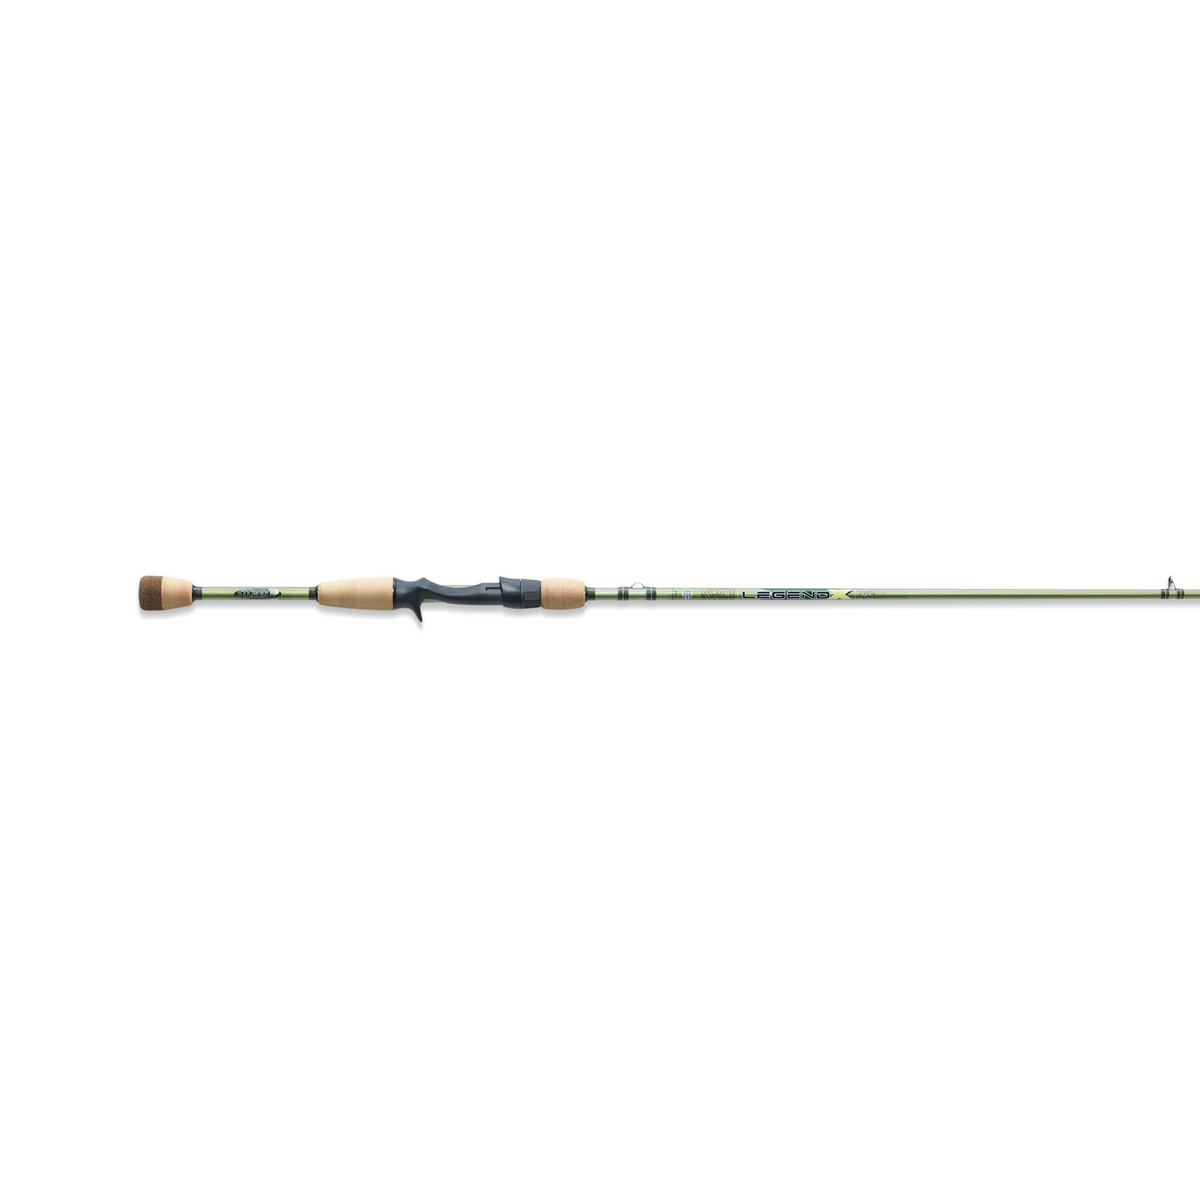 St. Croix Avid Series Walleye Spinning Rods - Freshwater